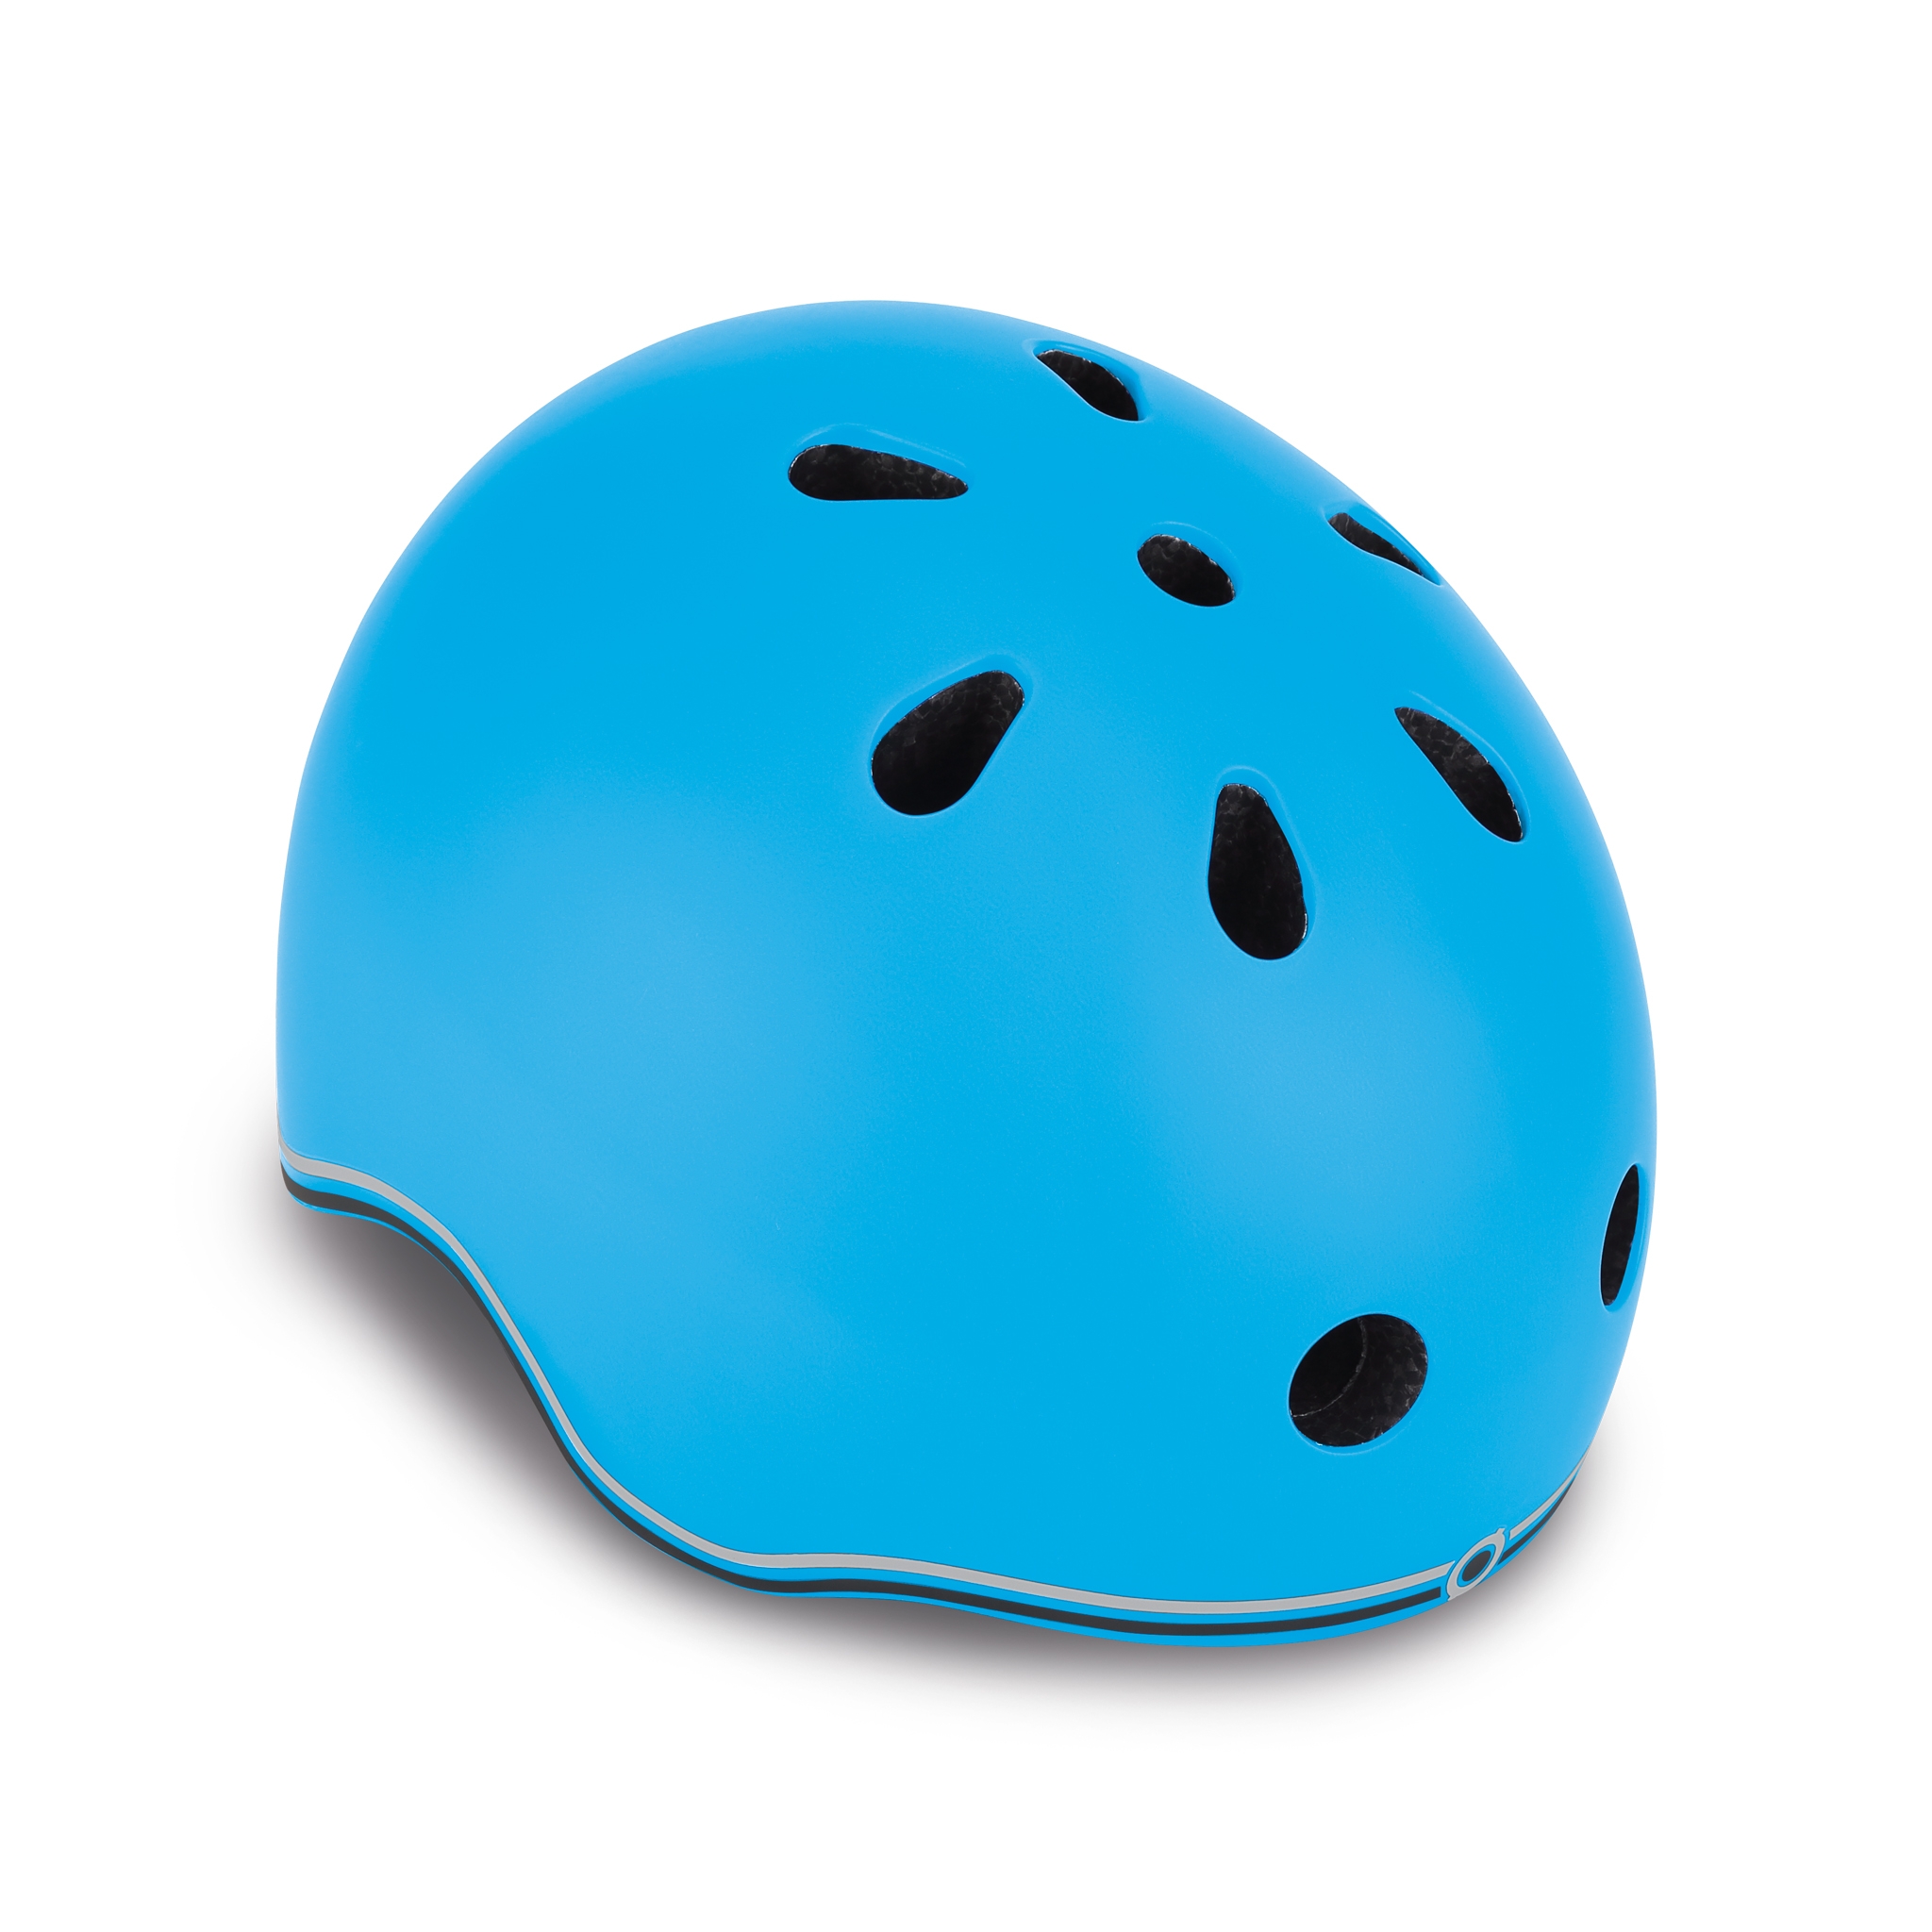 EVO-helmets-scooter-helmets-for-toddlers-in-mold-polycarbonate-outer-shell-sky-blue 0